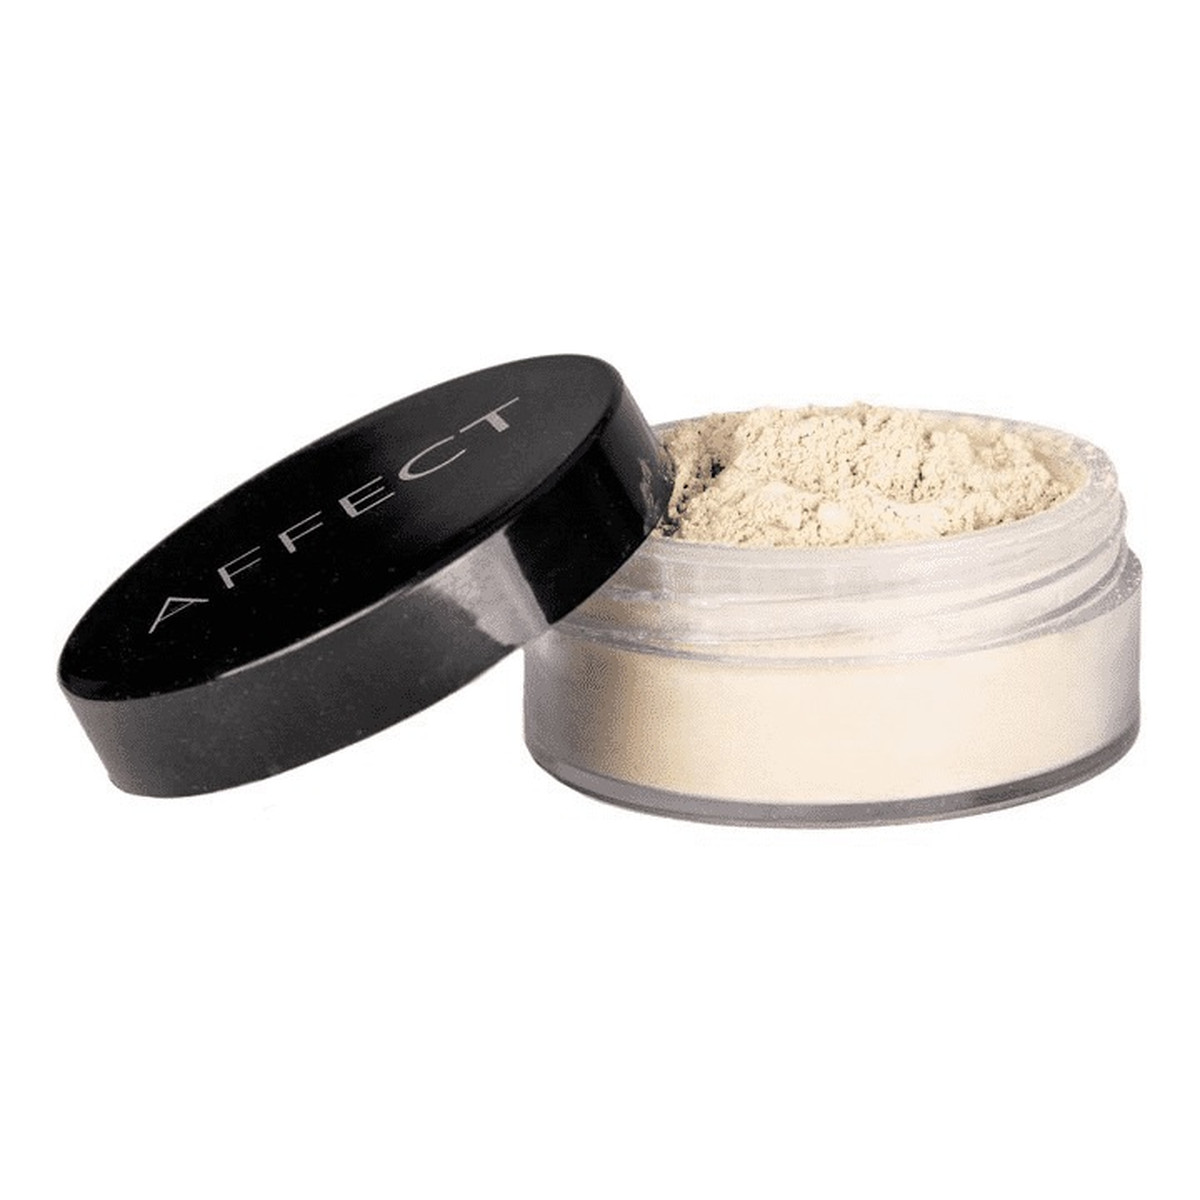 Affect Mineral Loose Powder Soft Touch Mineralny puder sypki 7g